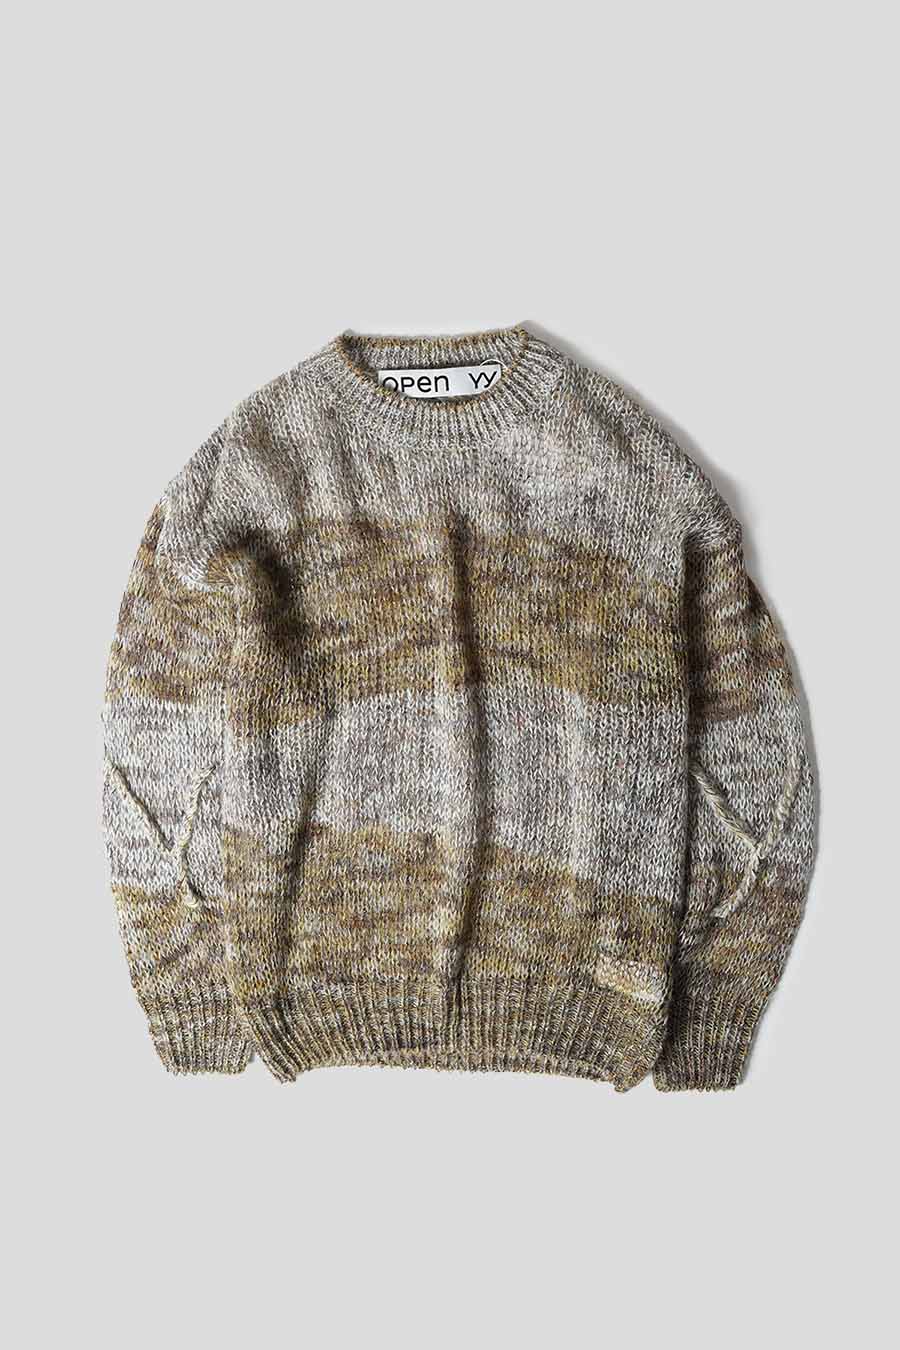 Open YY - PULLOVER YY SHIMMER BROWN - LE LABO STORE